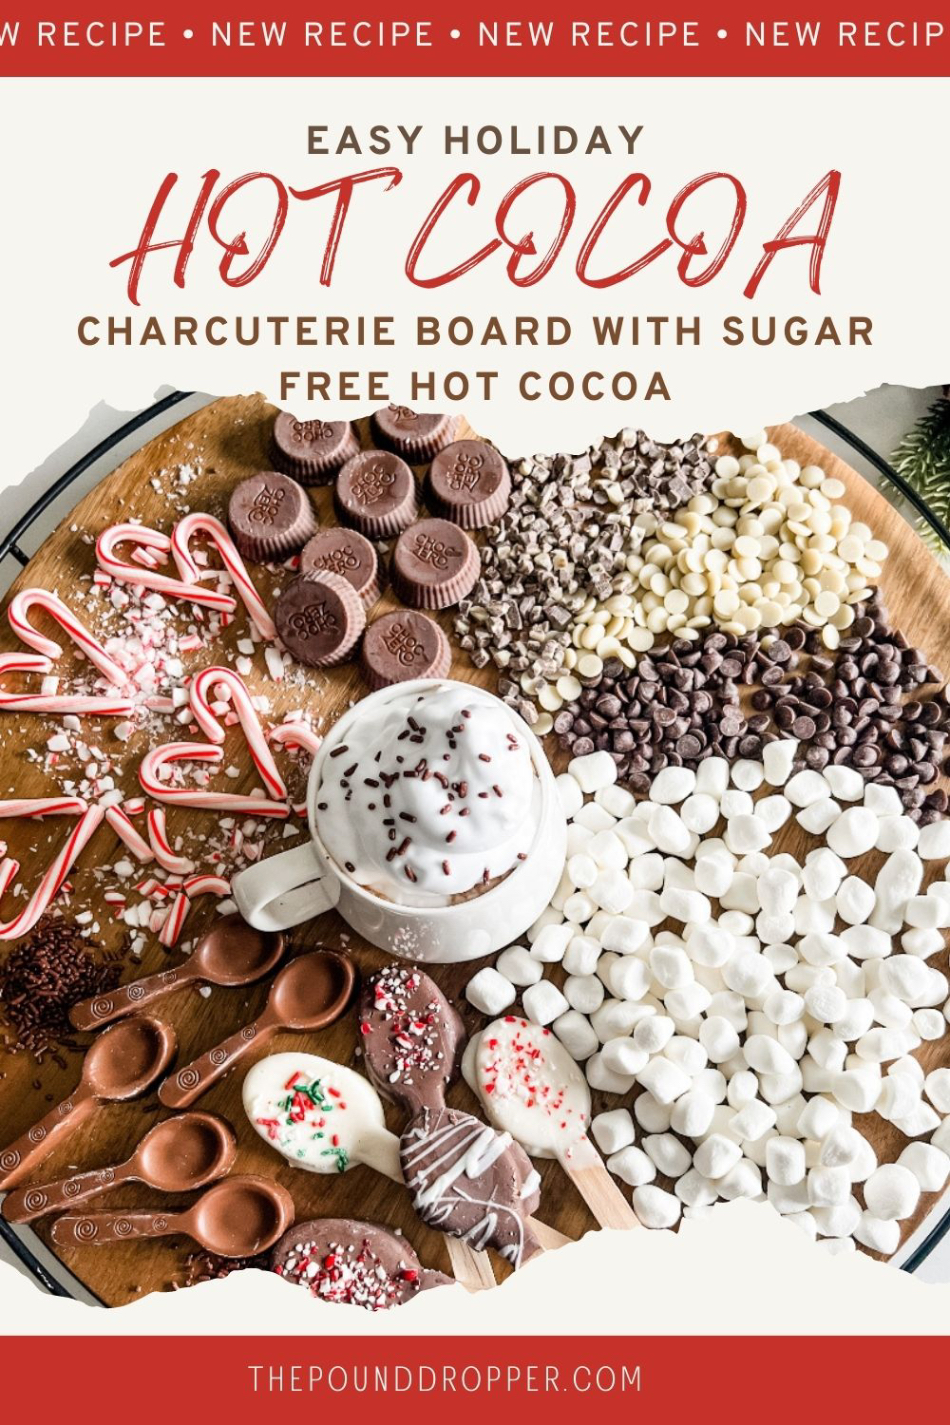 hit during the holidays! This hot cocoa tray is fun, festive, full of variety, and is perfect for any holiday party or gathering! via @pounddropper